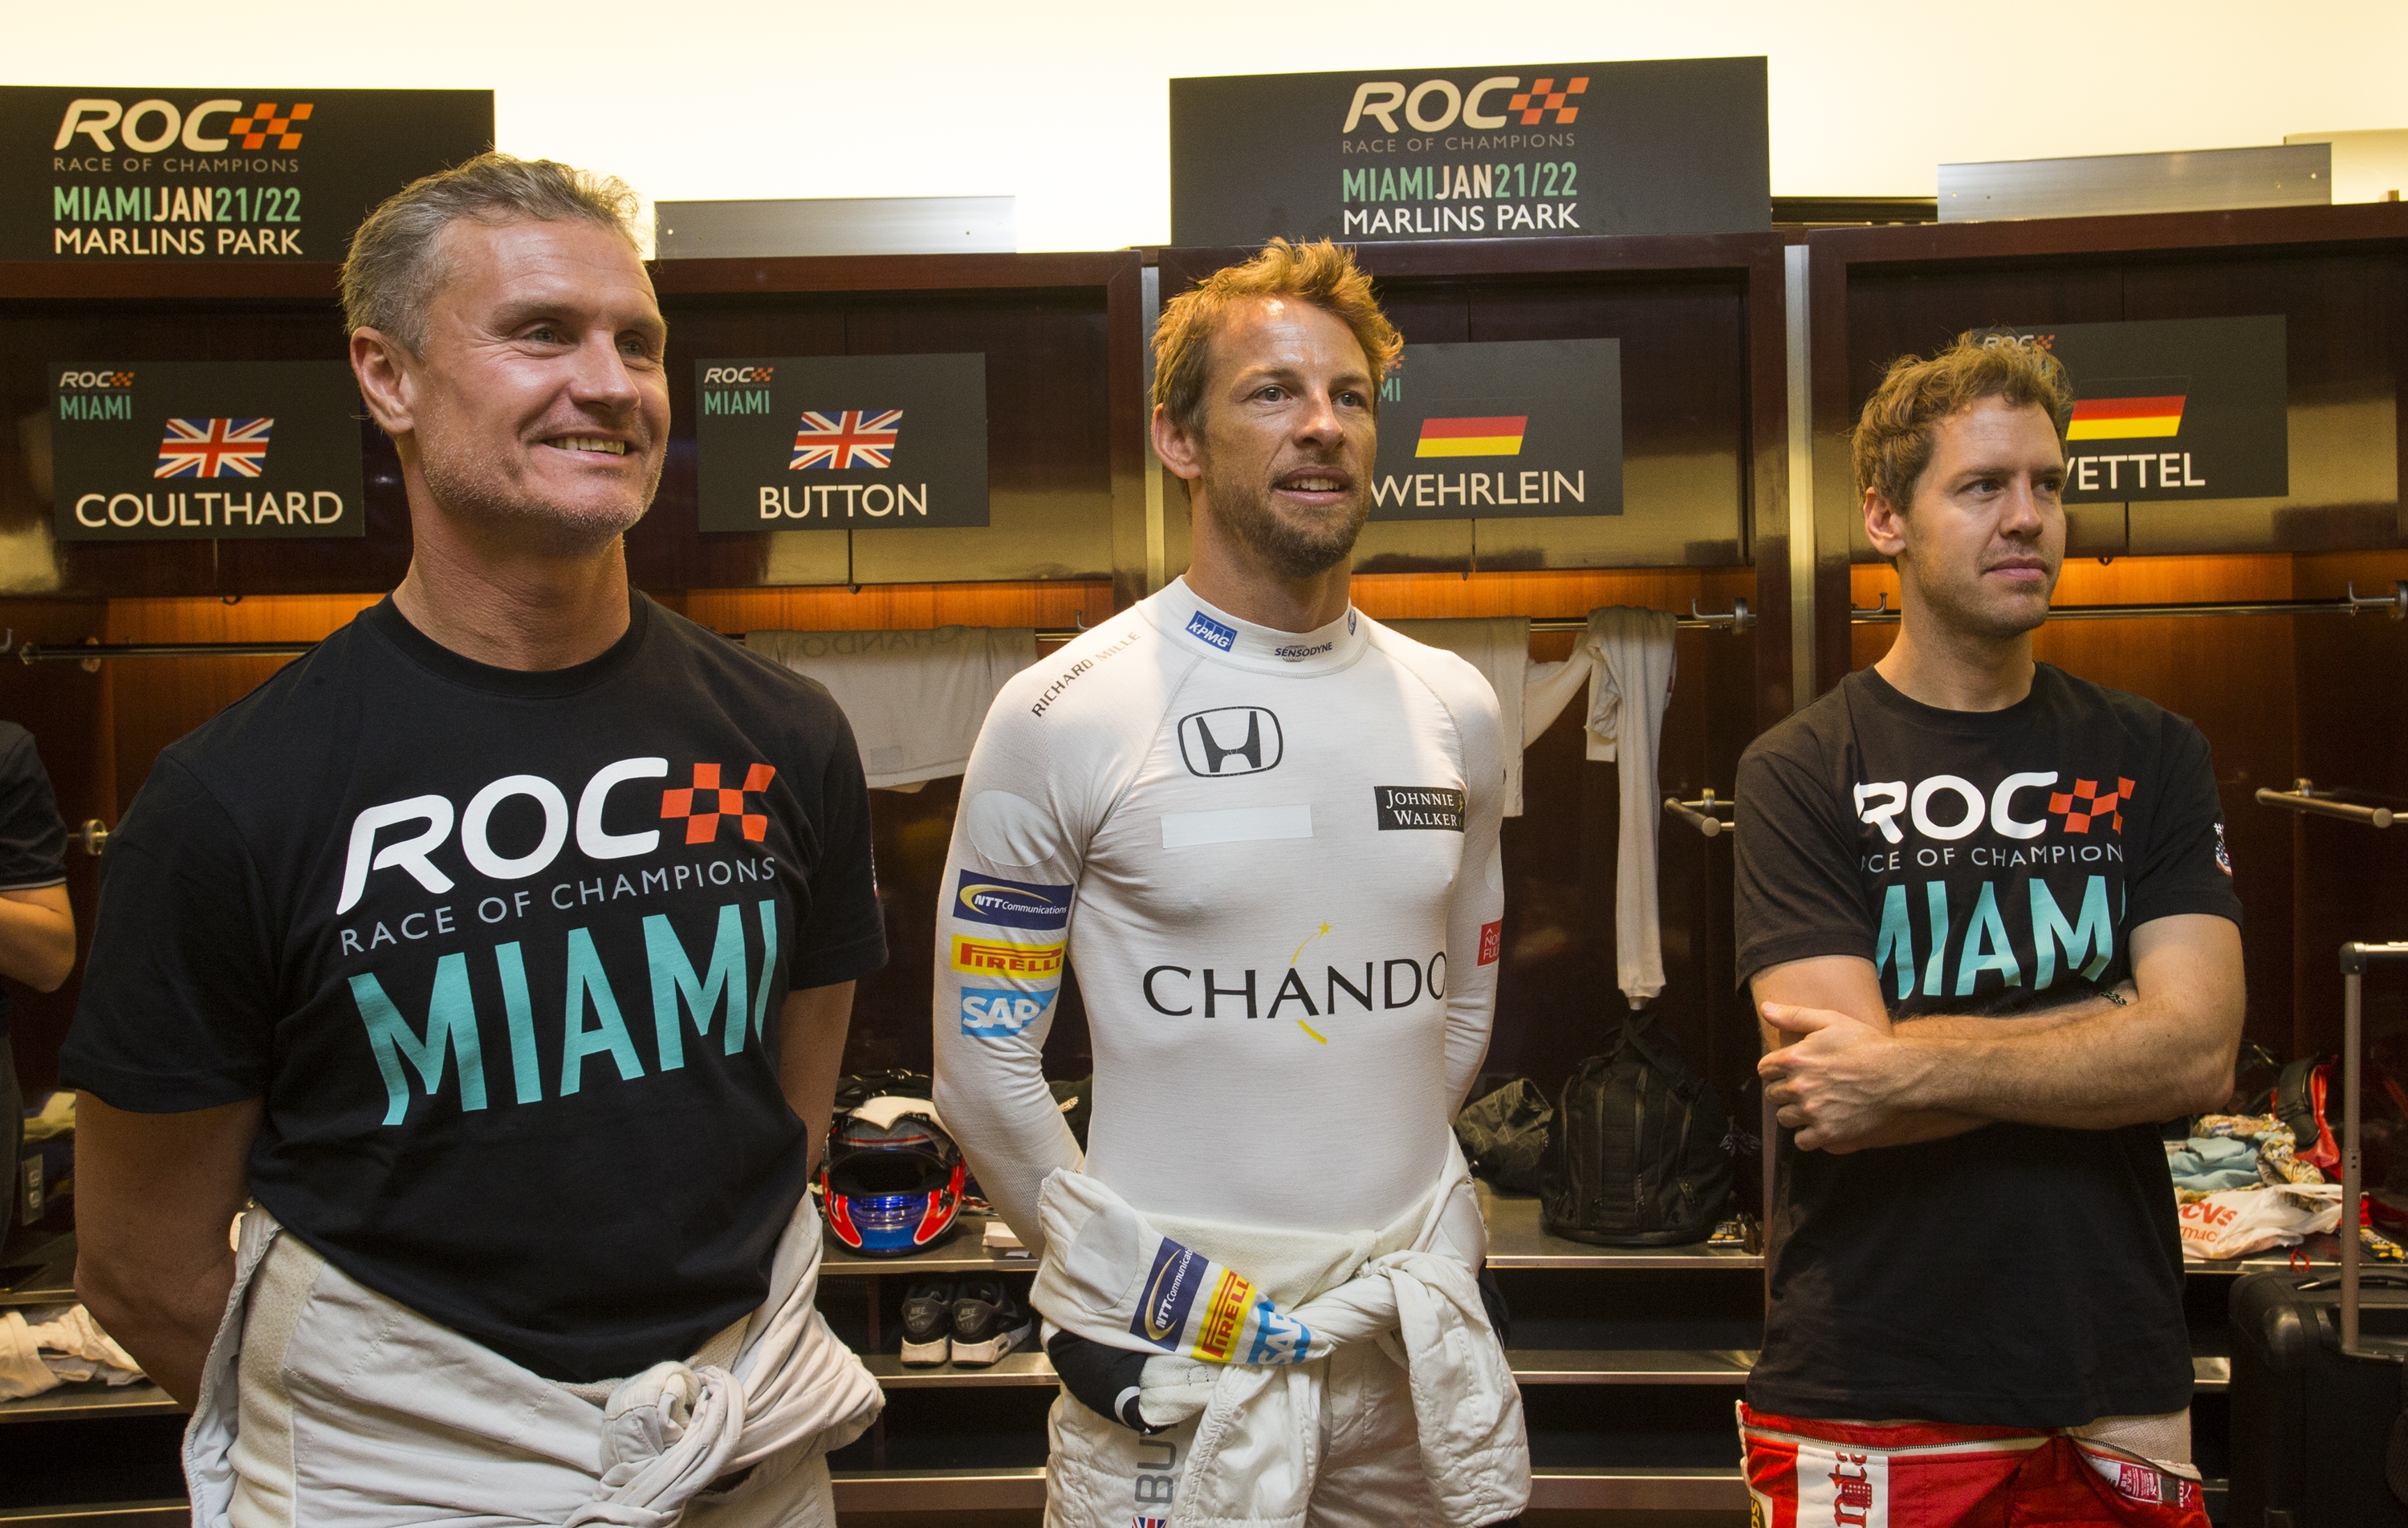 david_coulthard_gbr_jenson_button_gbr_and_sebastian_vettel_ger_backstage_before_the_roc_nations_cup_on_sunday_22_january_2017_at_marlins_park_miami_florida_usa_743.JPG